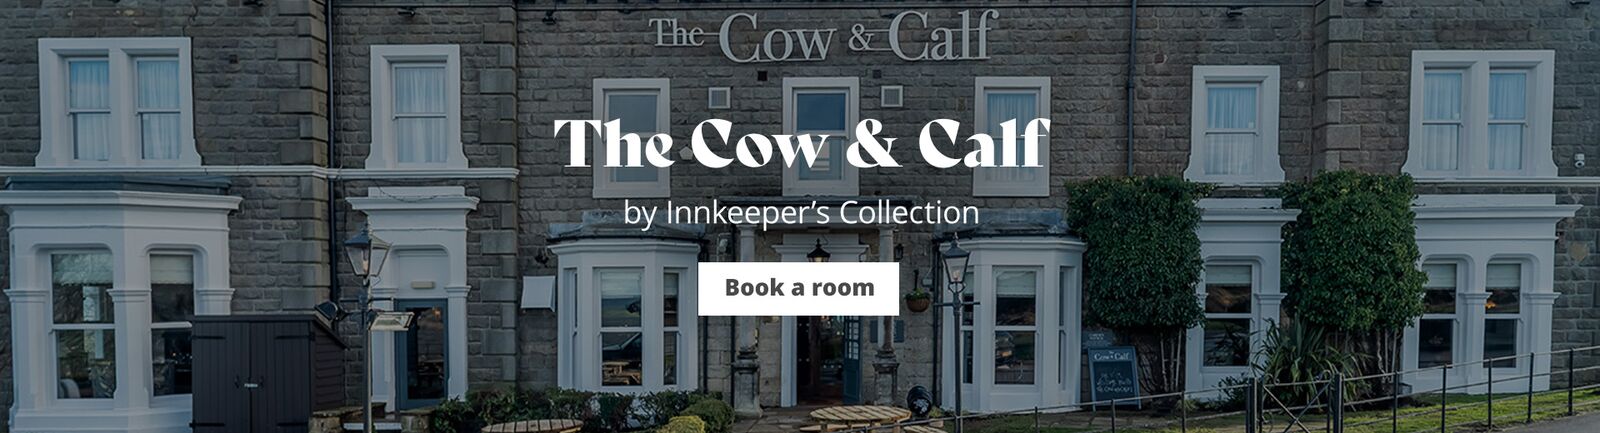 large-ikc-2023-the-cow-calf-ilkley-west-yorkshire-home-banner.jpg